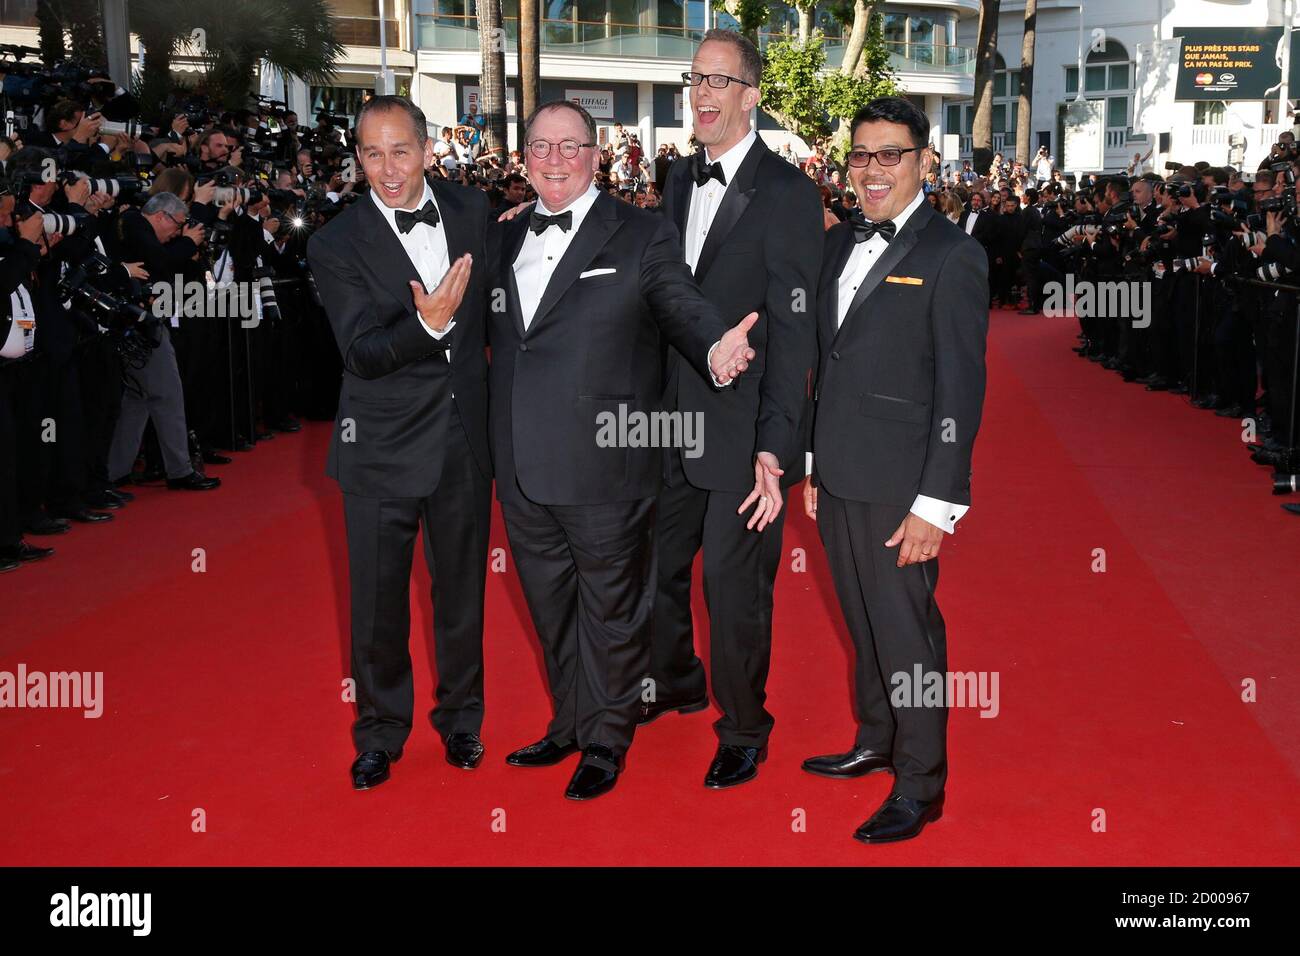 L-R) Producer Jonas Riviera, executive producer John Lasseter, director  Pete Docter and co-director Ronaldo Del Carmen pose on the red carpet as  they arrive for the screening of the animated film "Inside